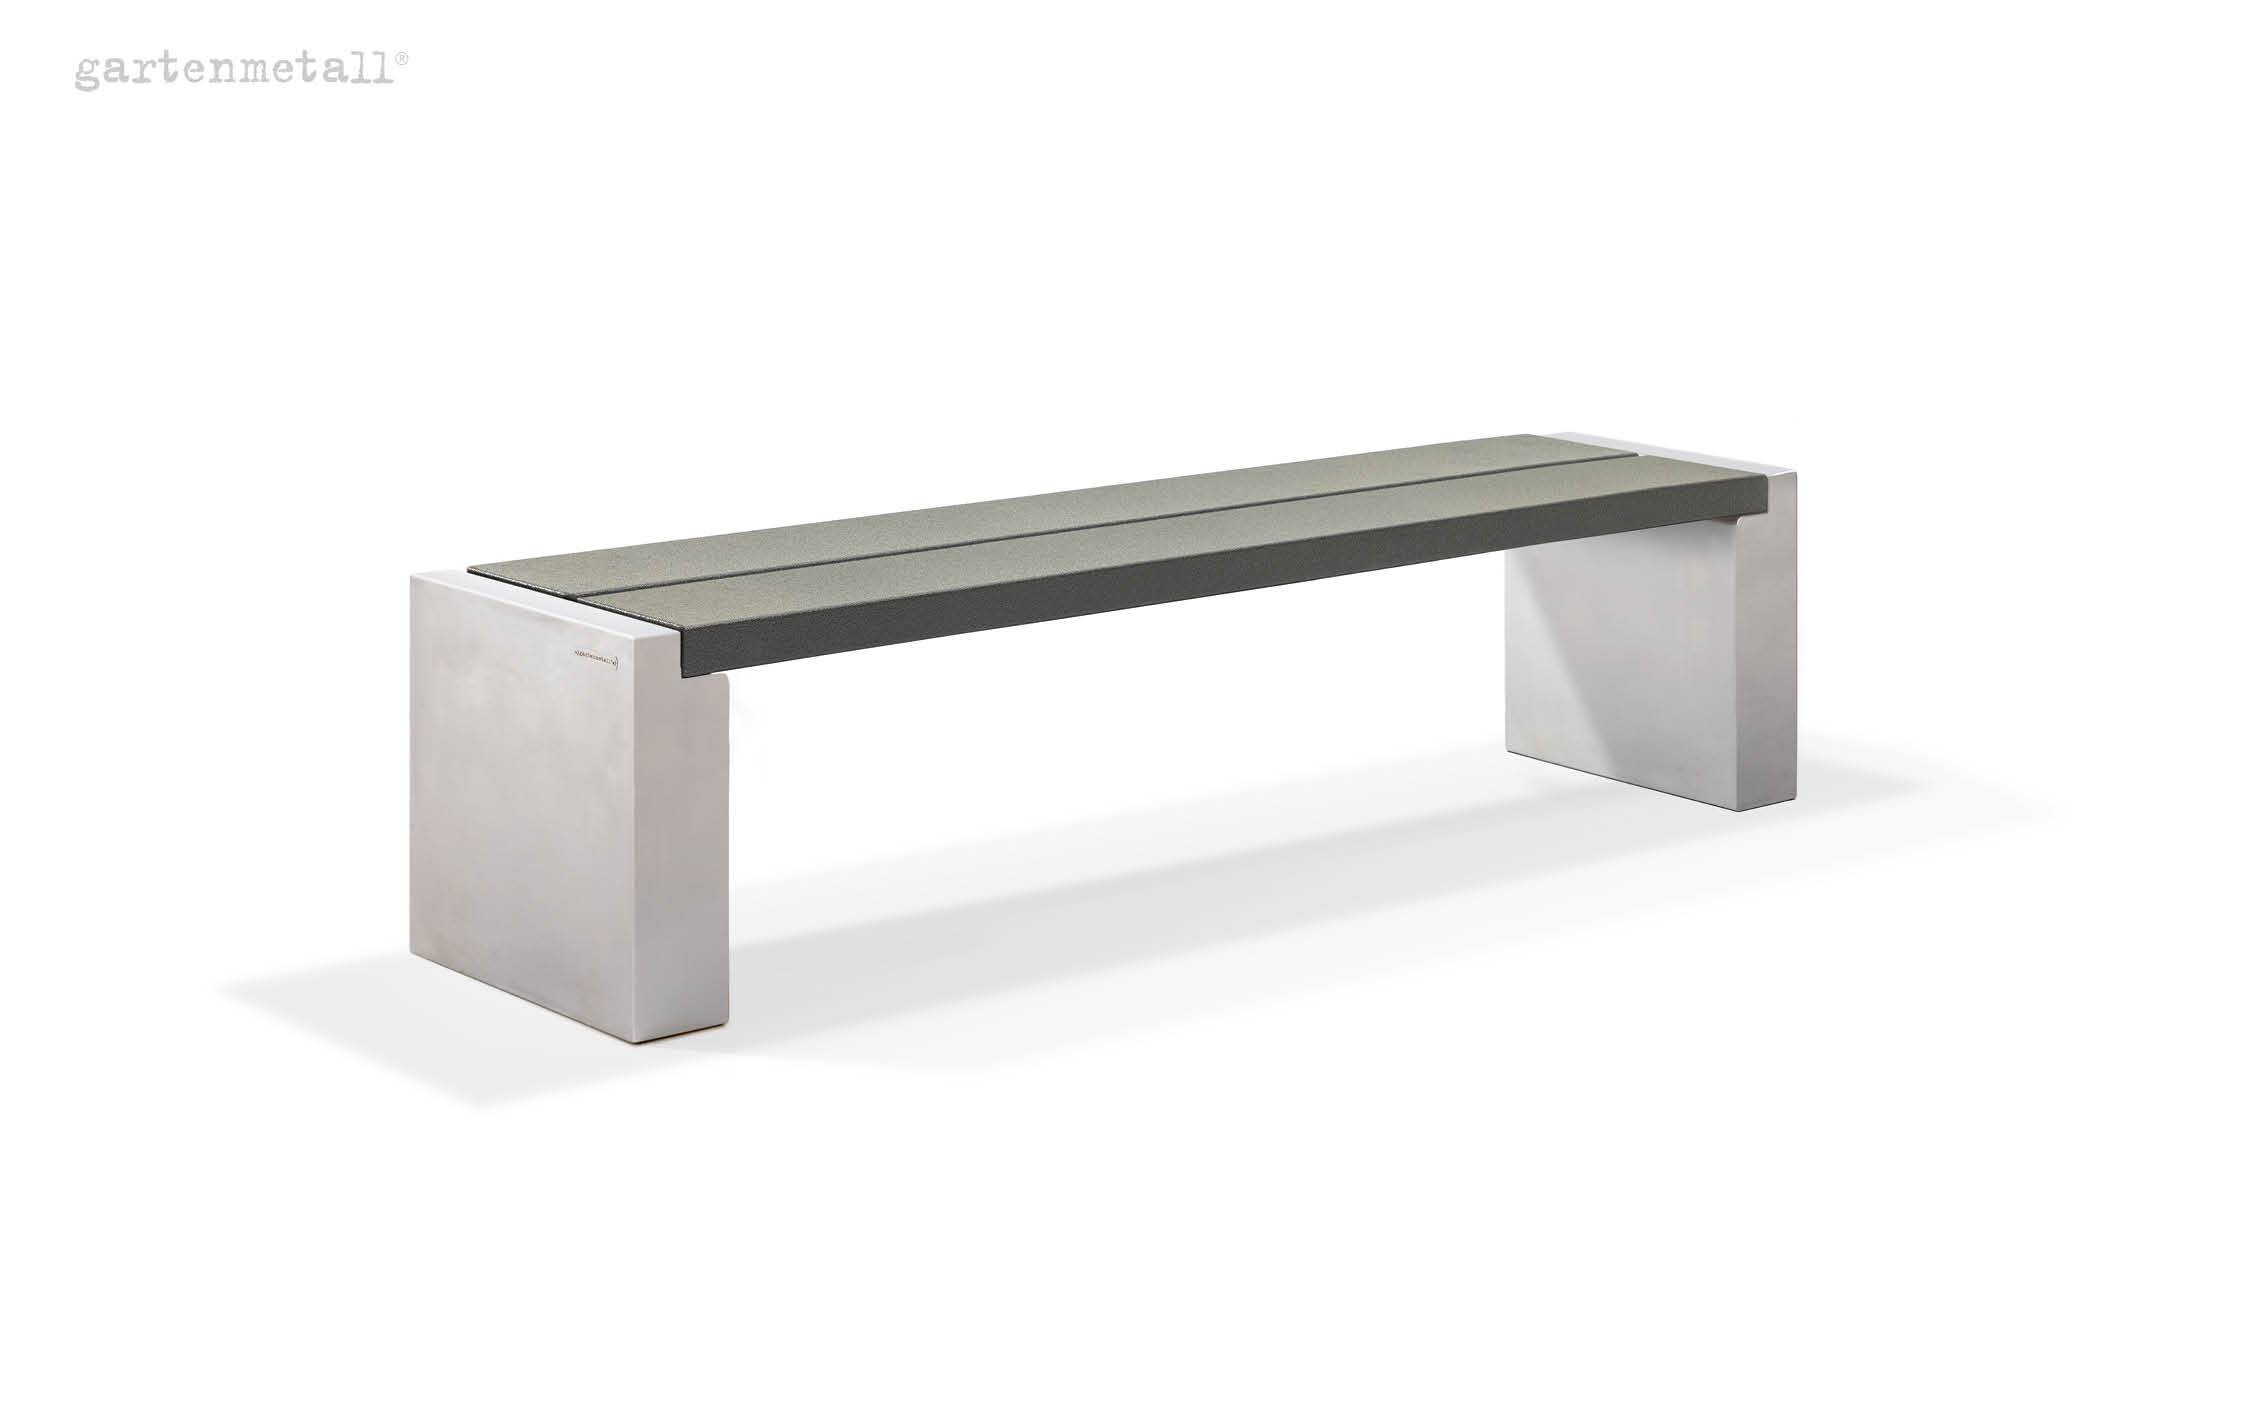 Bench type EMDEN 2.0 m with plastic-coated seat cushion